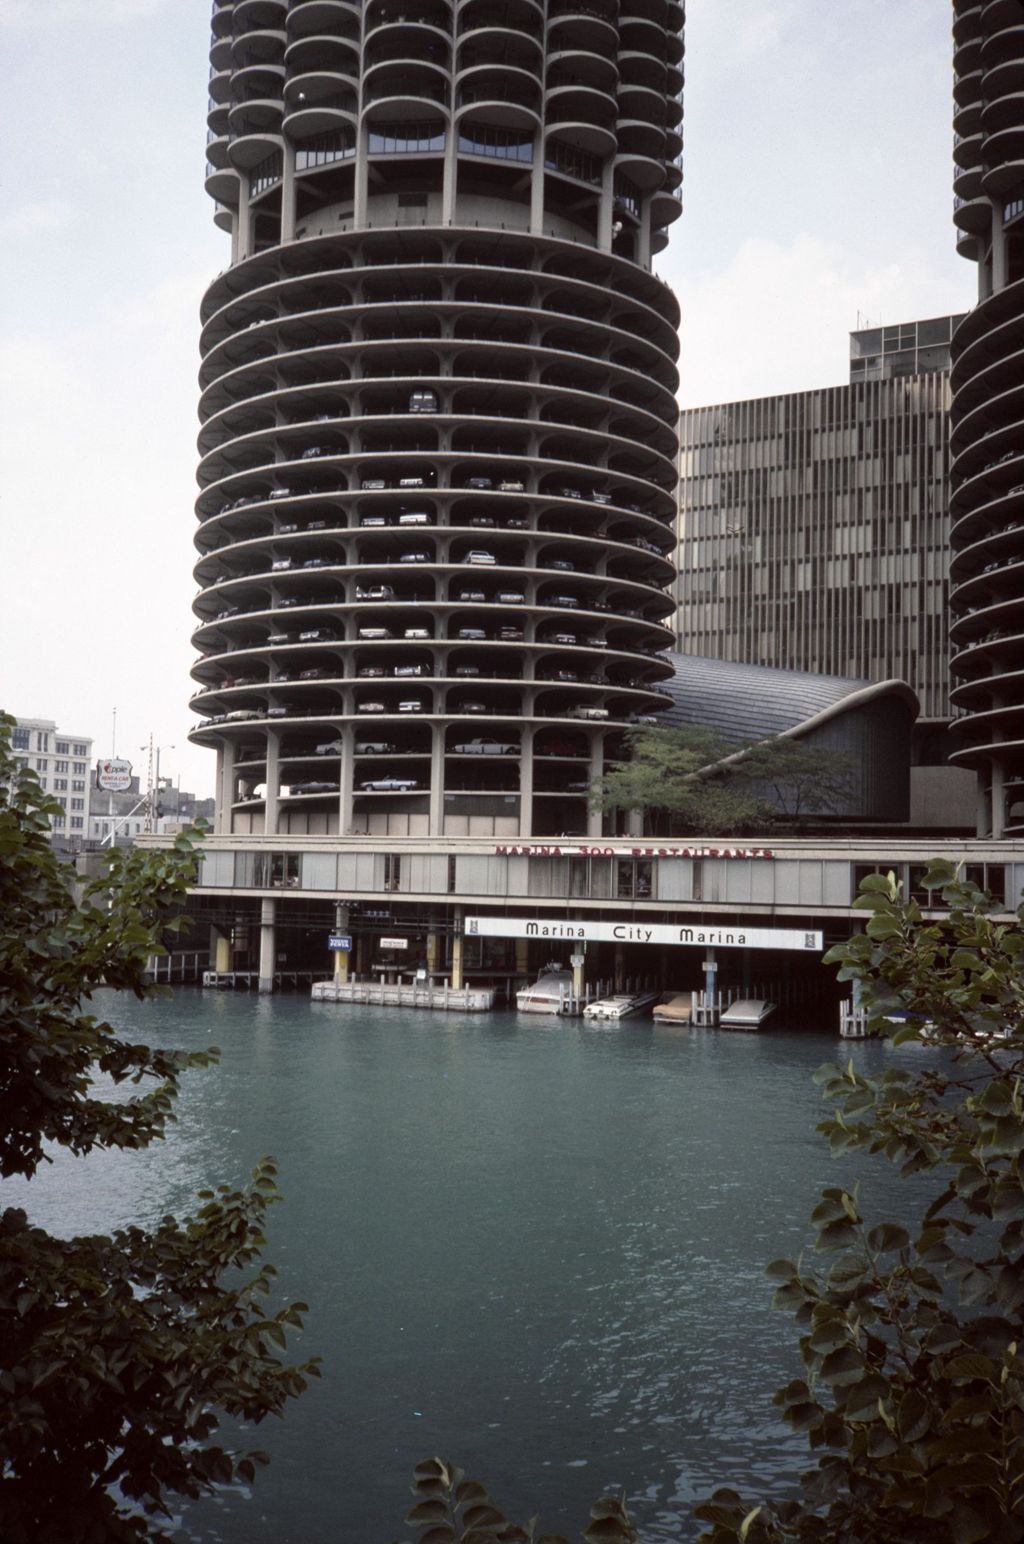 Marina City from the Chicago River